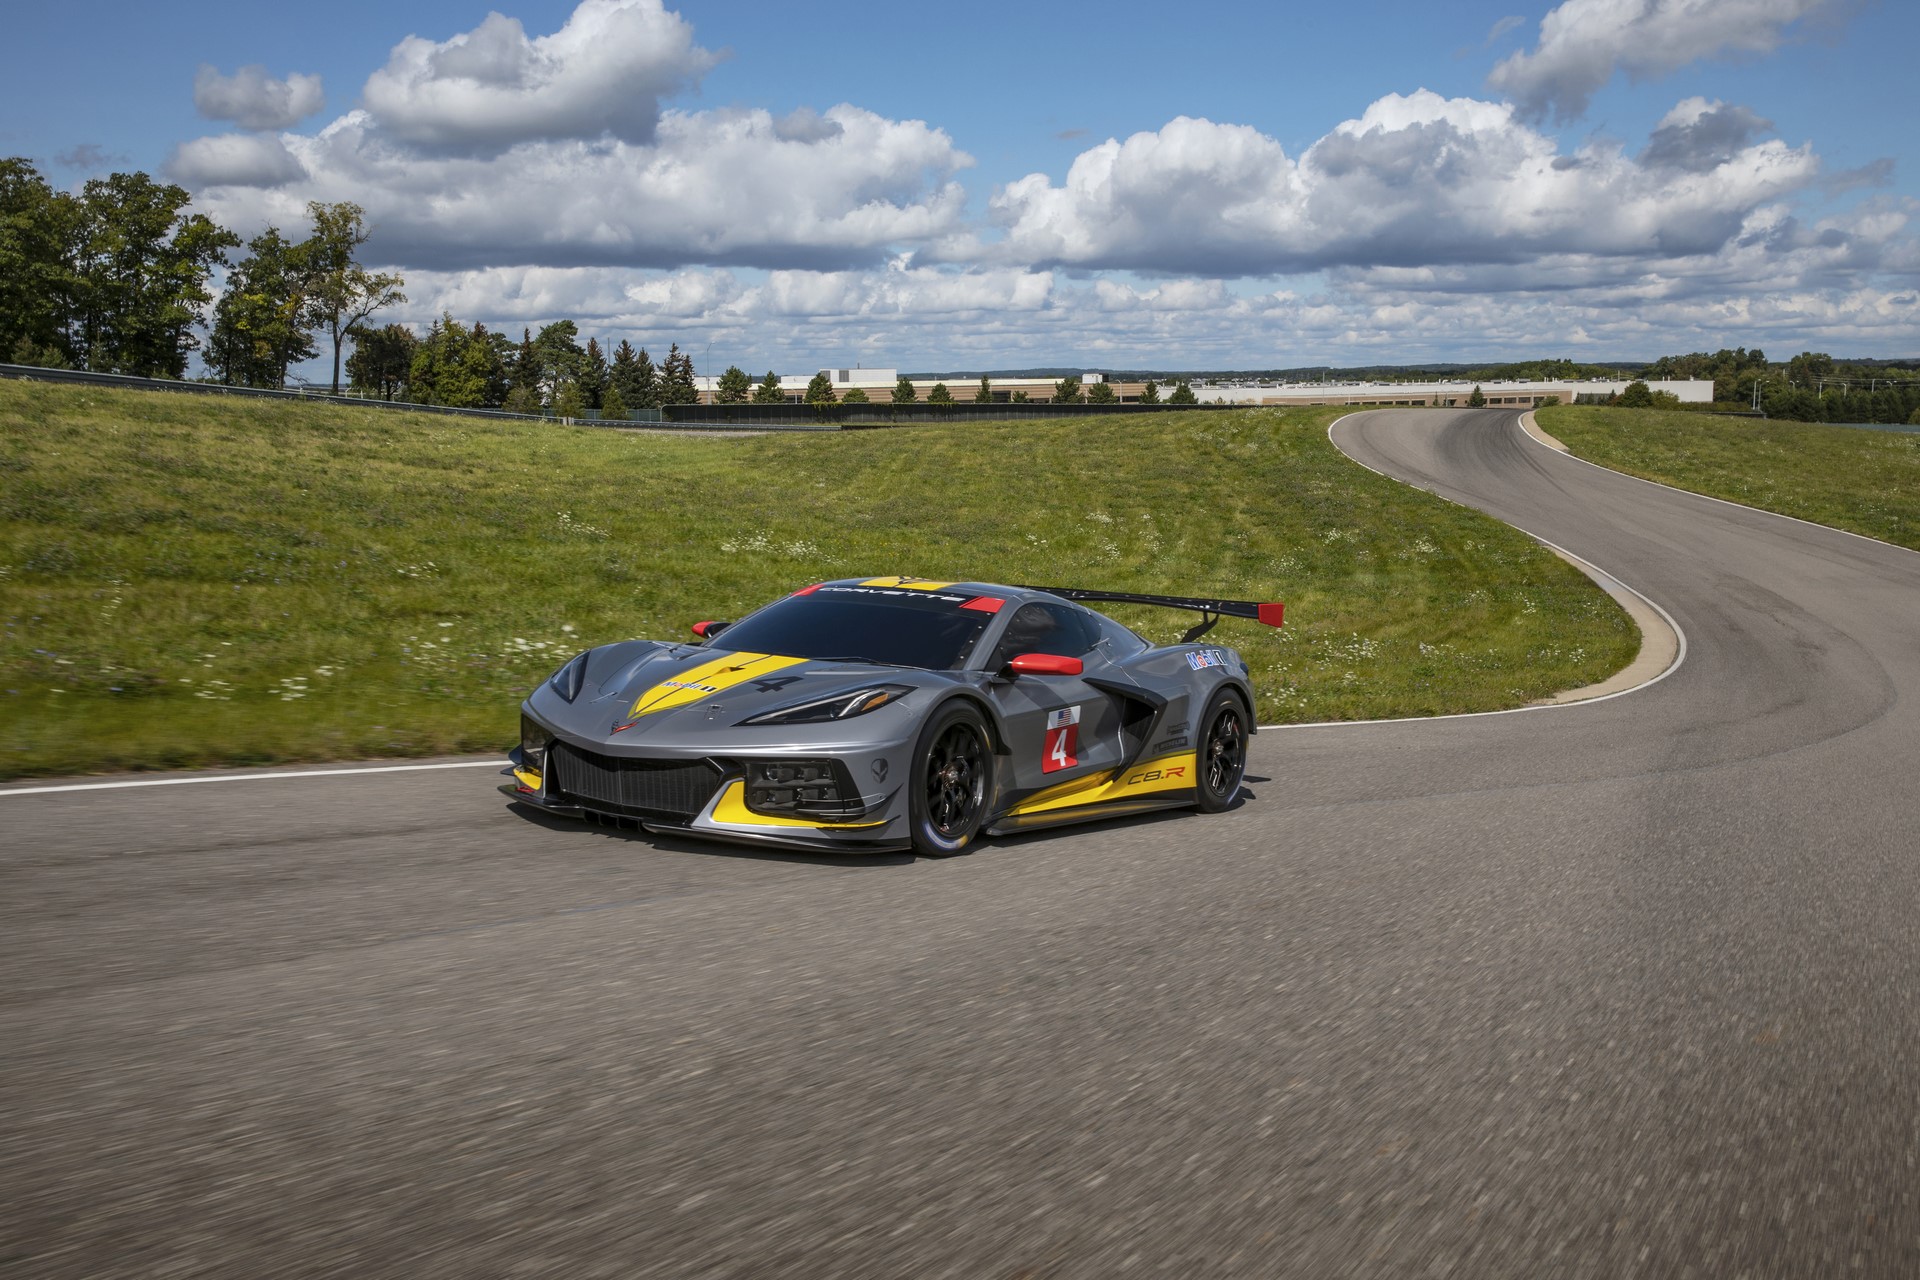 Chevrolet begins a new chapter in its storied racing legacy with the introduction of the new mid-engine Corvette race car, known as the C8.R.